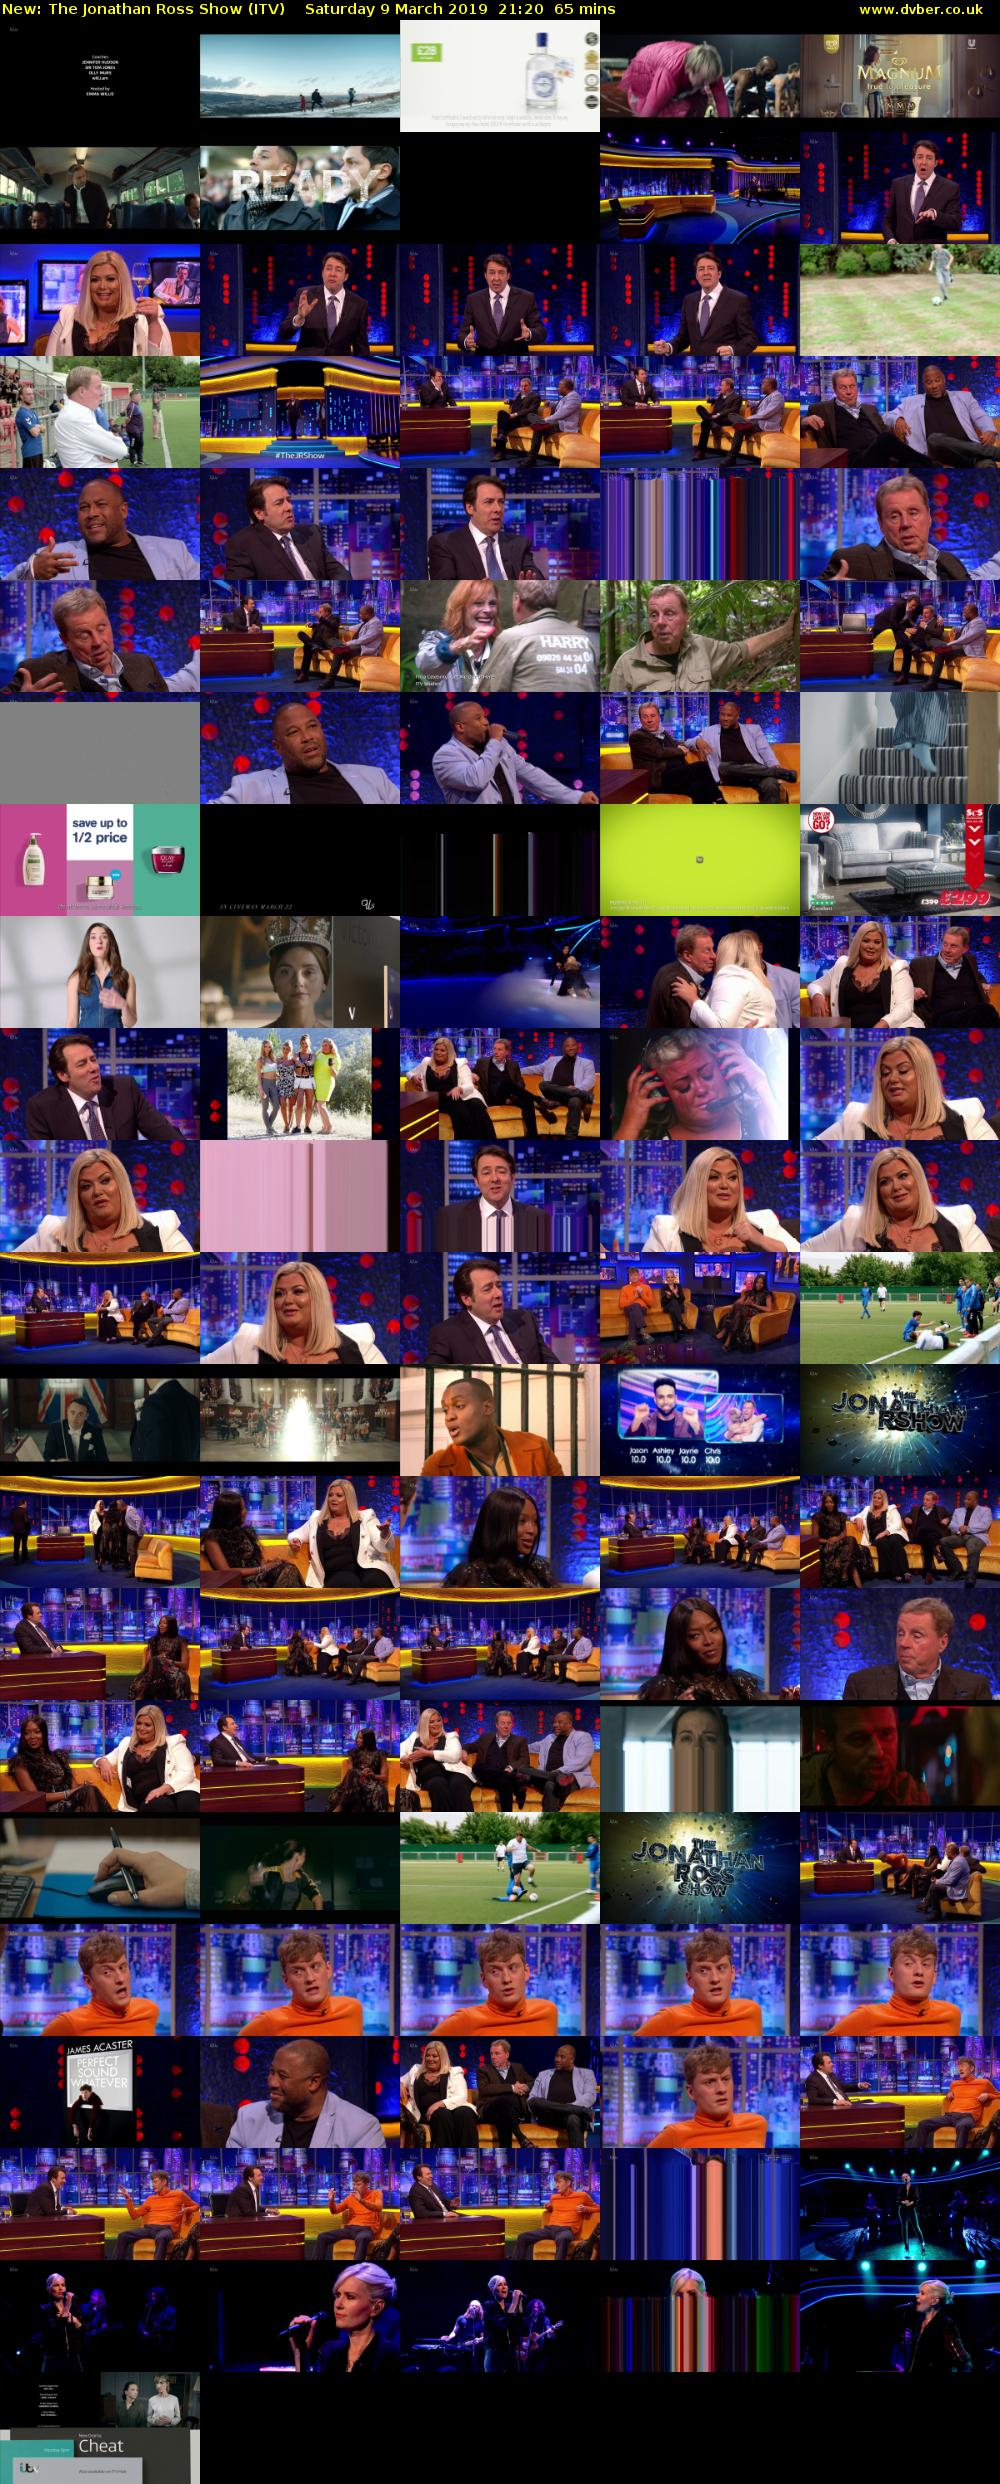 The Jonathan Ross Show (ITV) Saturday 9 March 2019 21:20 - 22:25